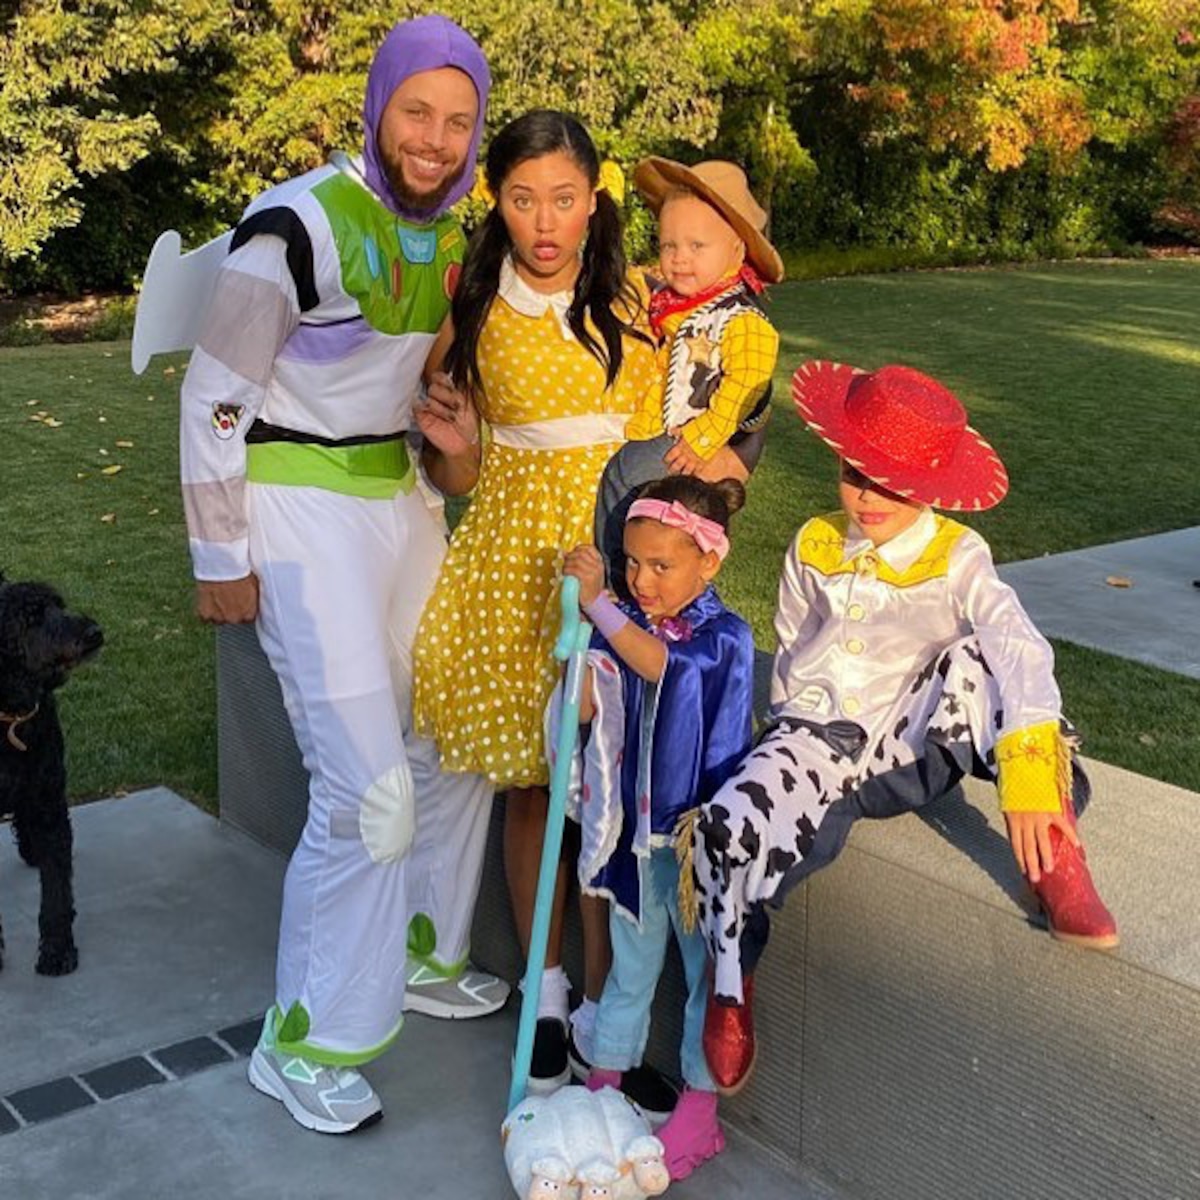 likhoa unconventional halloween costume ideas from stephen curry s family and their adorable kids for 6538cfffe2933 Unconventional Halloween Costume Ideas From Stephen Curry's Family And Their Adorable Kids For 2023